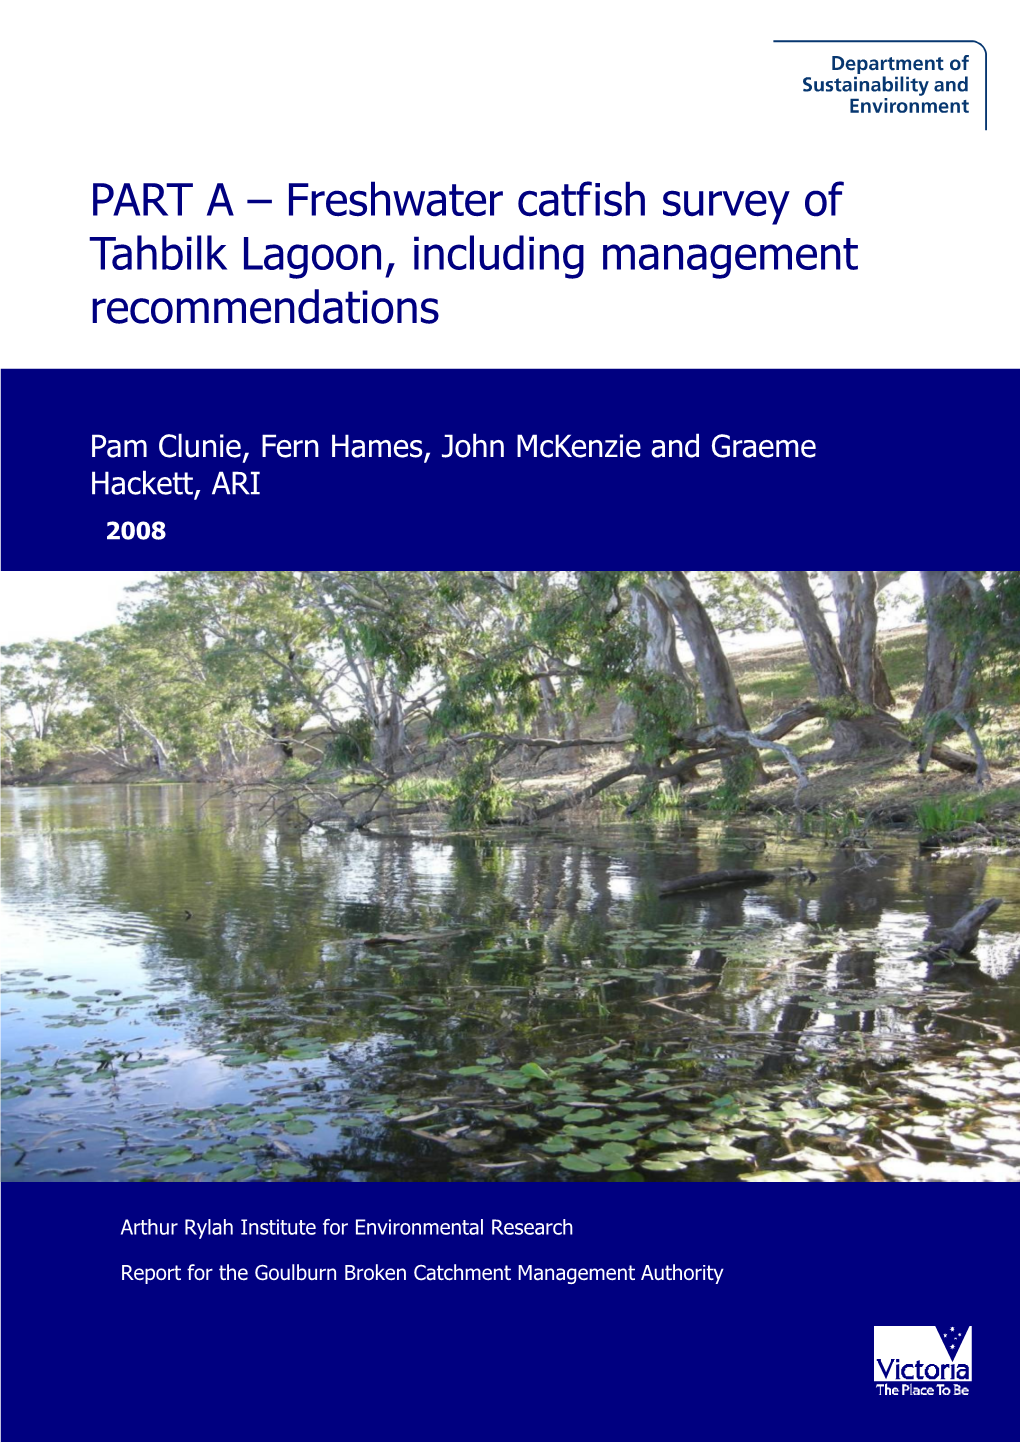 PART a – Freshwater Catfish Survey of Tahbilk Lagoon, Including Management Recommendations